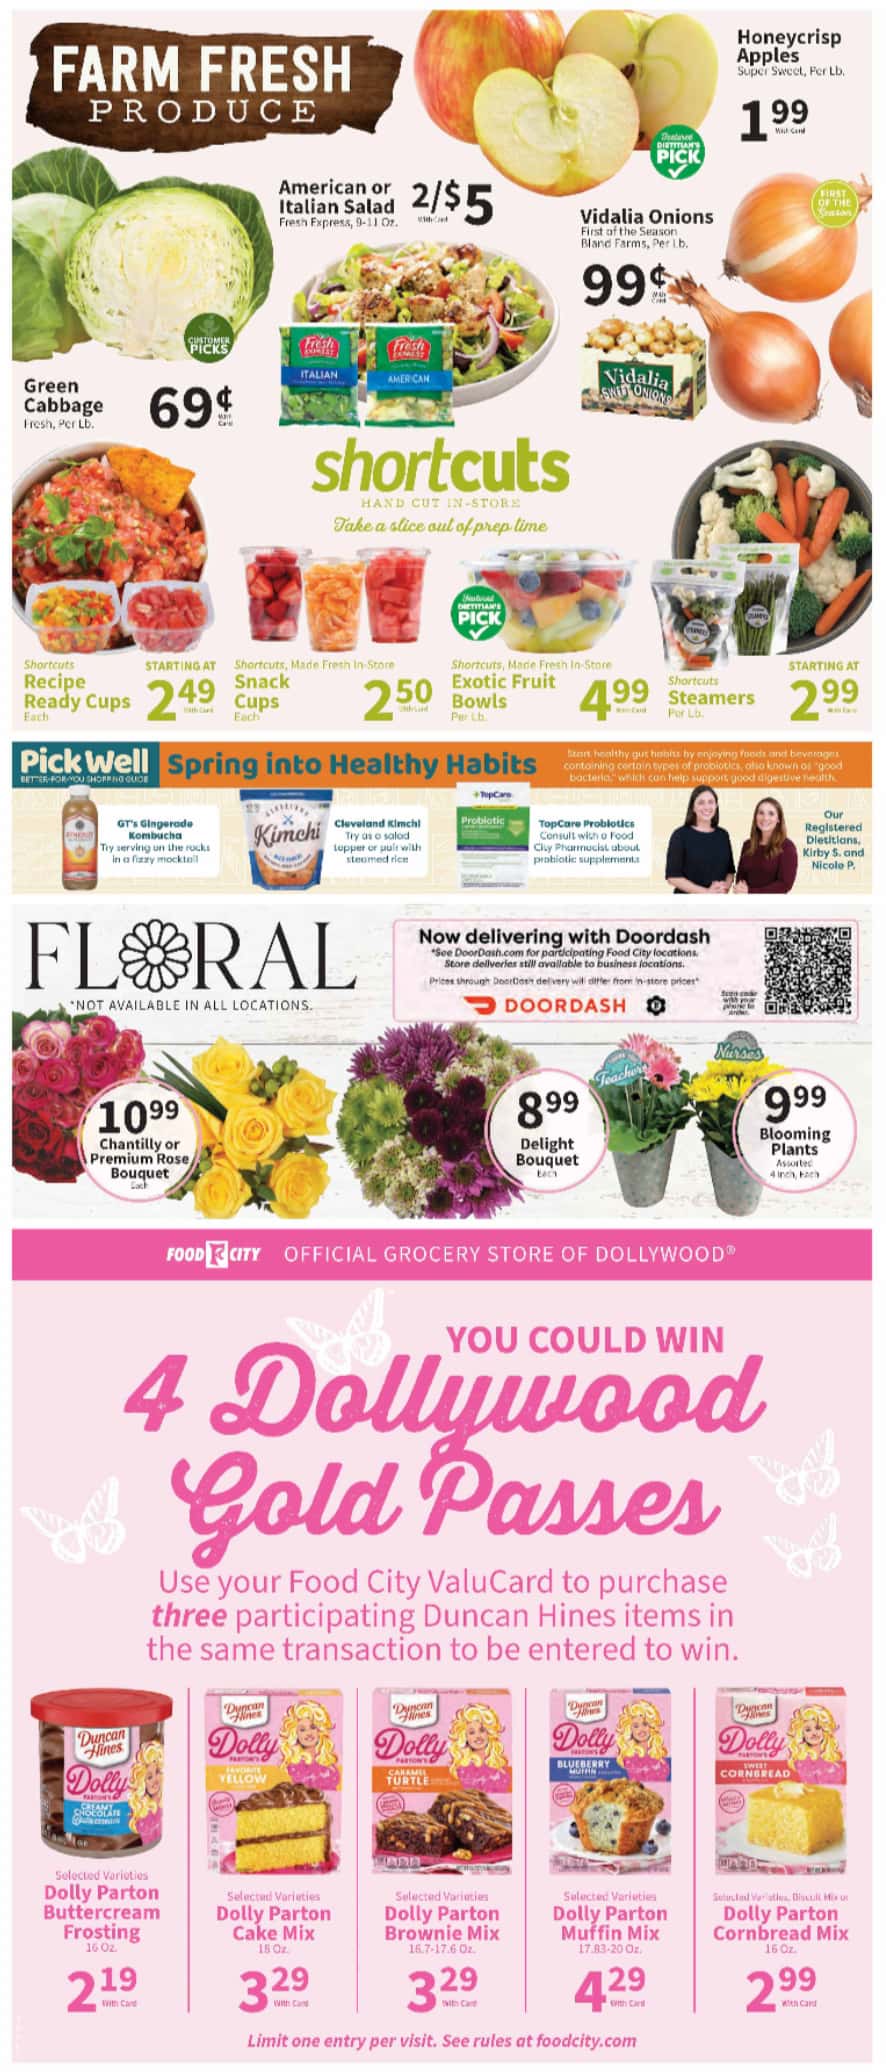 FoodCity_weekly_ad_042424_03